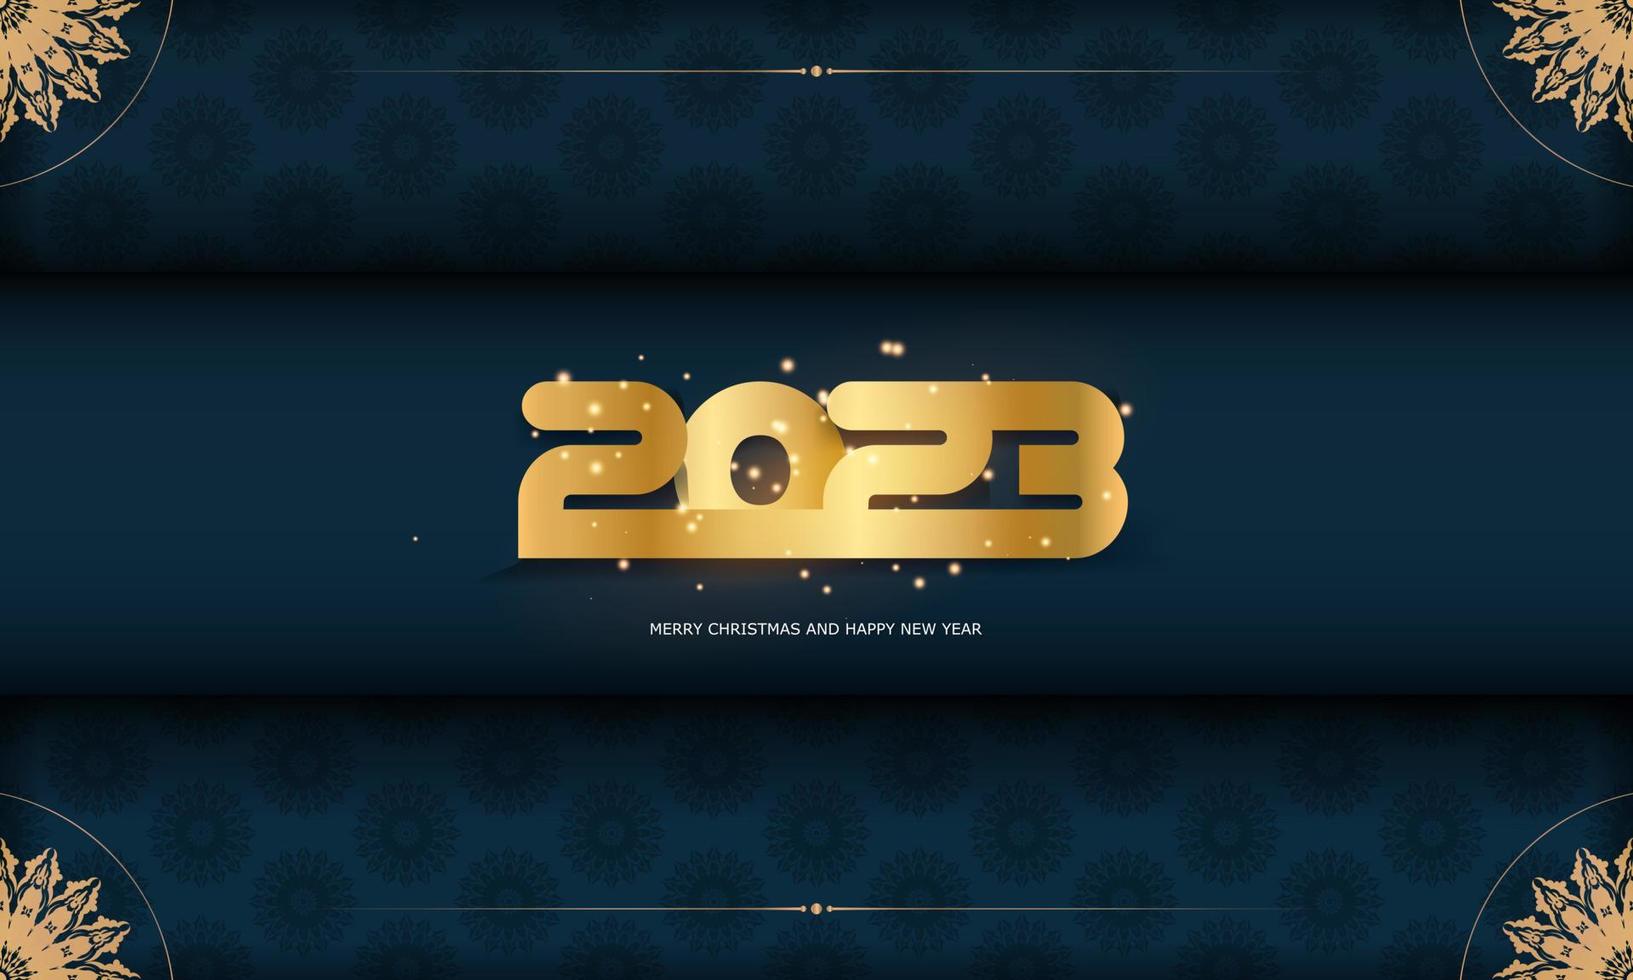 Happy New Year 2023 festive postcard. Blue and gold color. vector